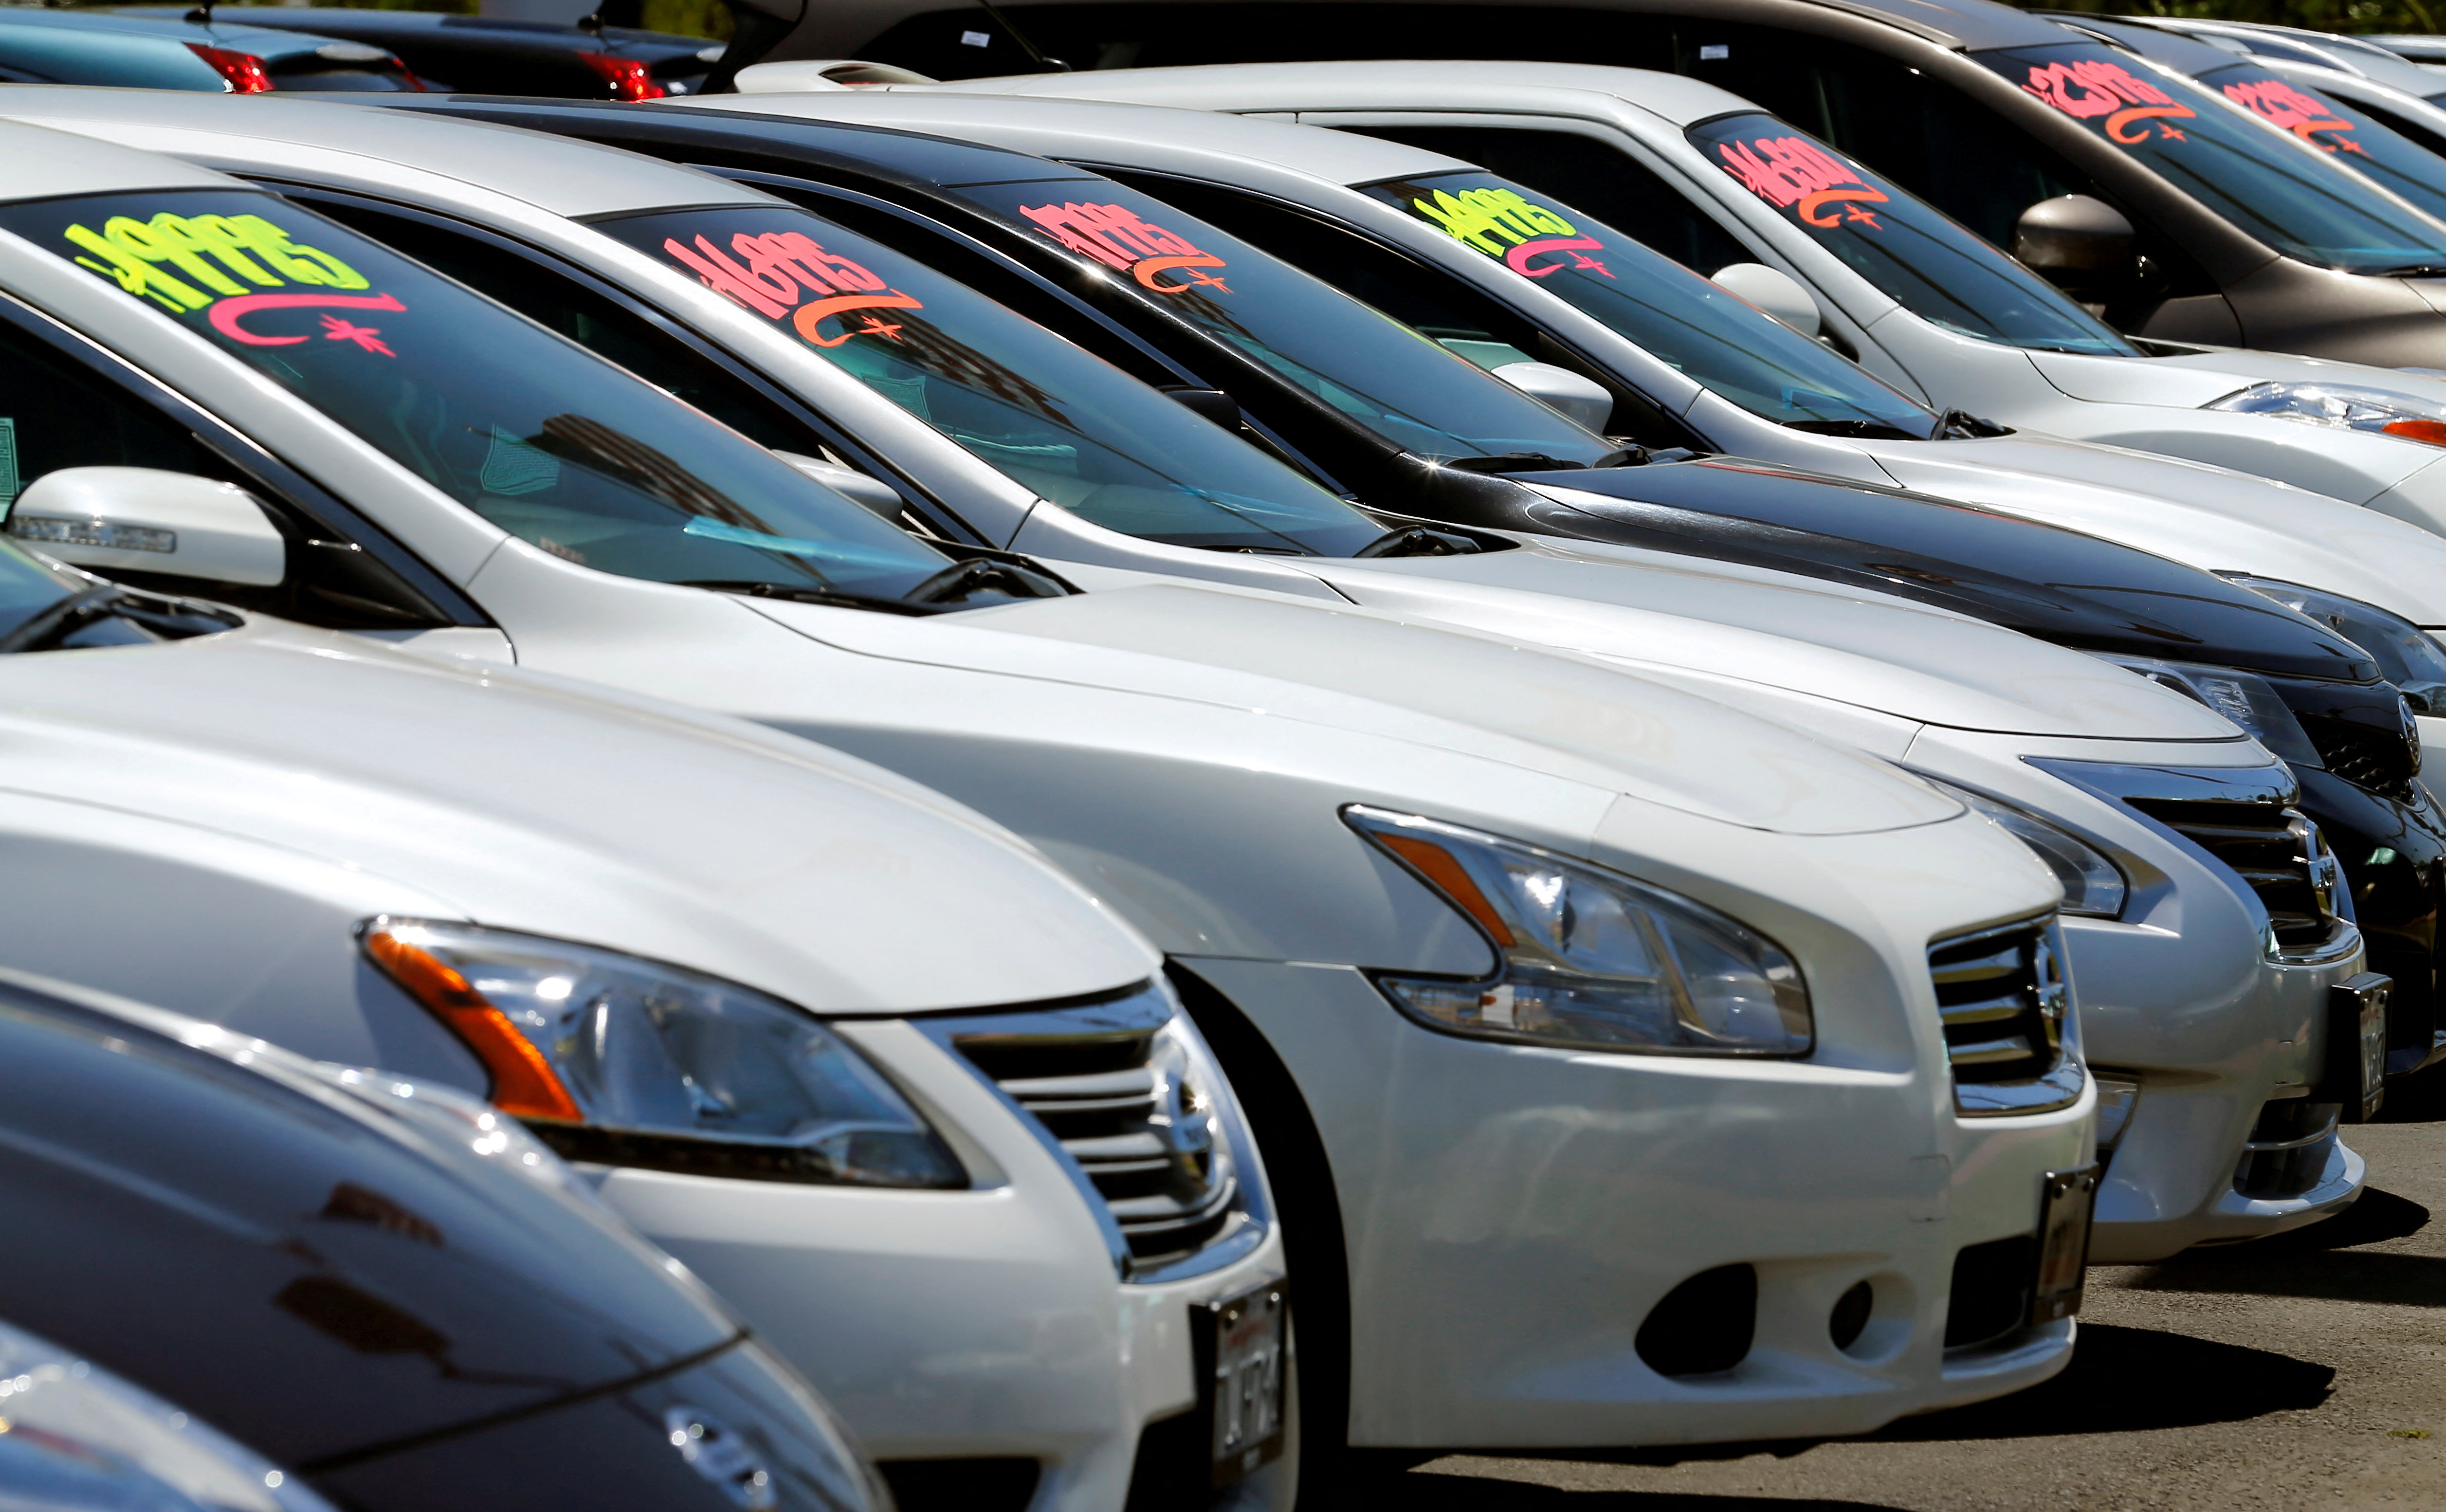 Automobiles are shown for sale at a car dealership in Carlsbad, California